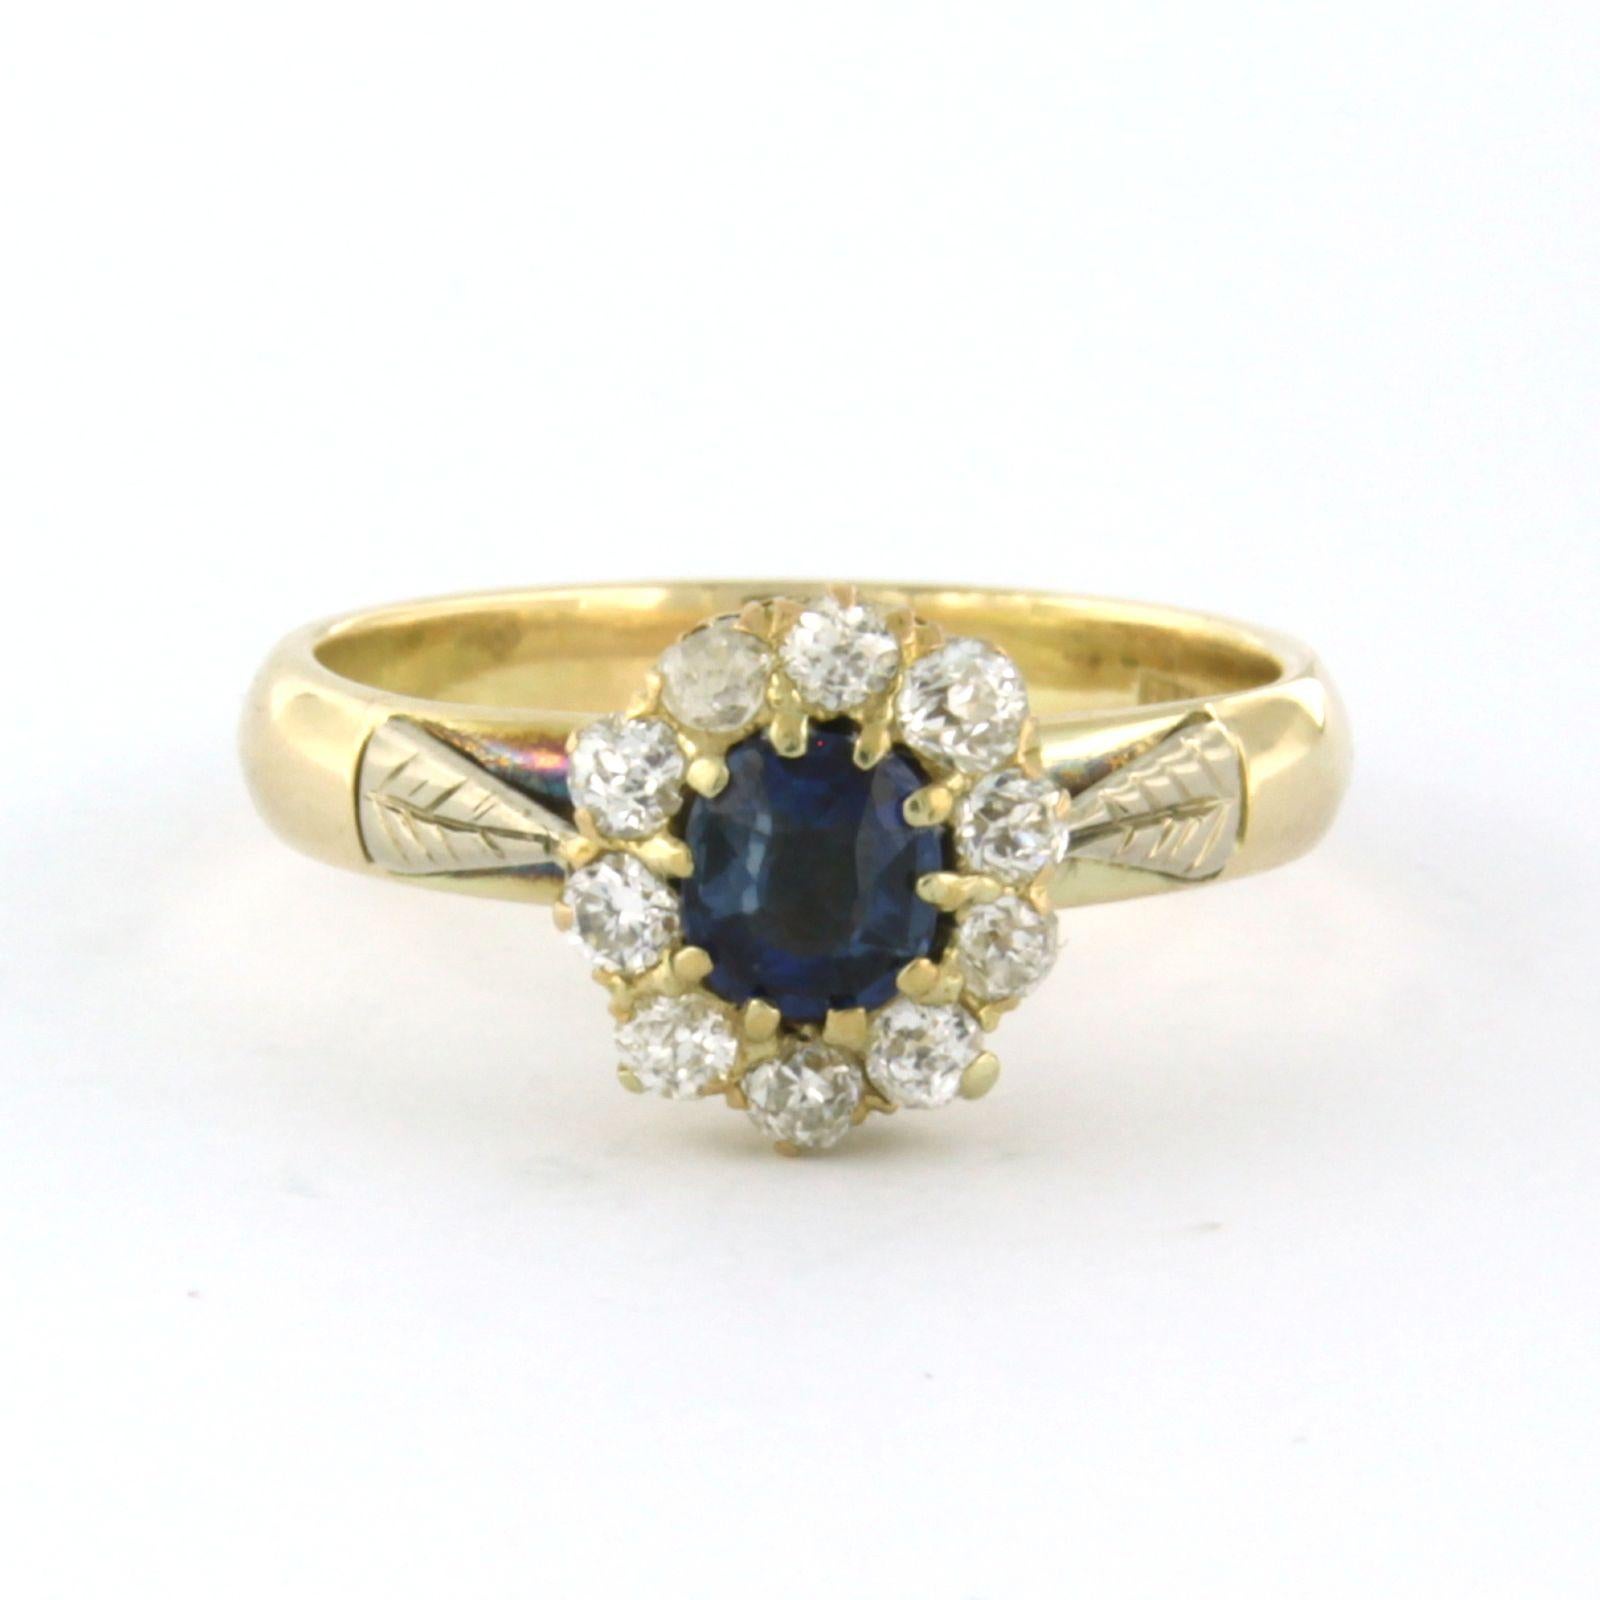 14k yellow gold cluster ring set with a central sapphire of approximately 0.60ct and arround of old mine cut diamonds up to . 0.30ct - F/G - VS/SI/P - ring size U.S. 7 - EU. 17.25(54)

detailed description:

the top of the ring is 1.0 cm wide

Ring